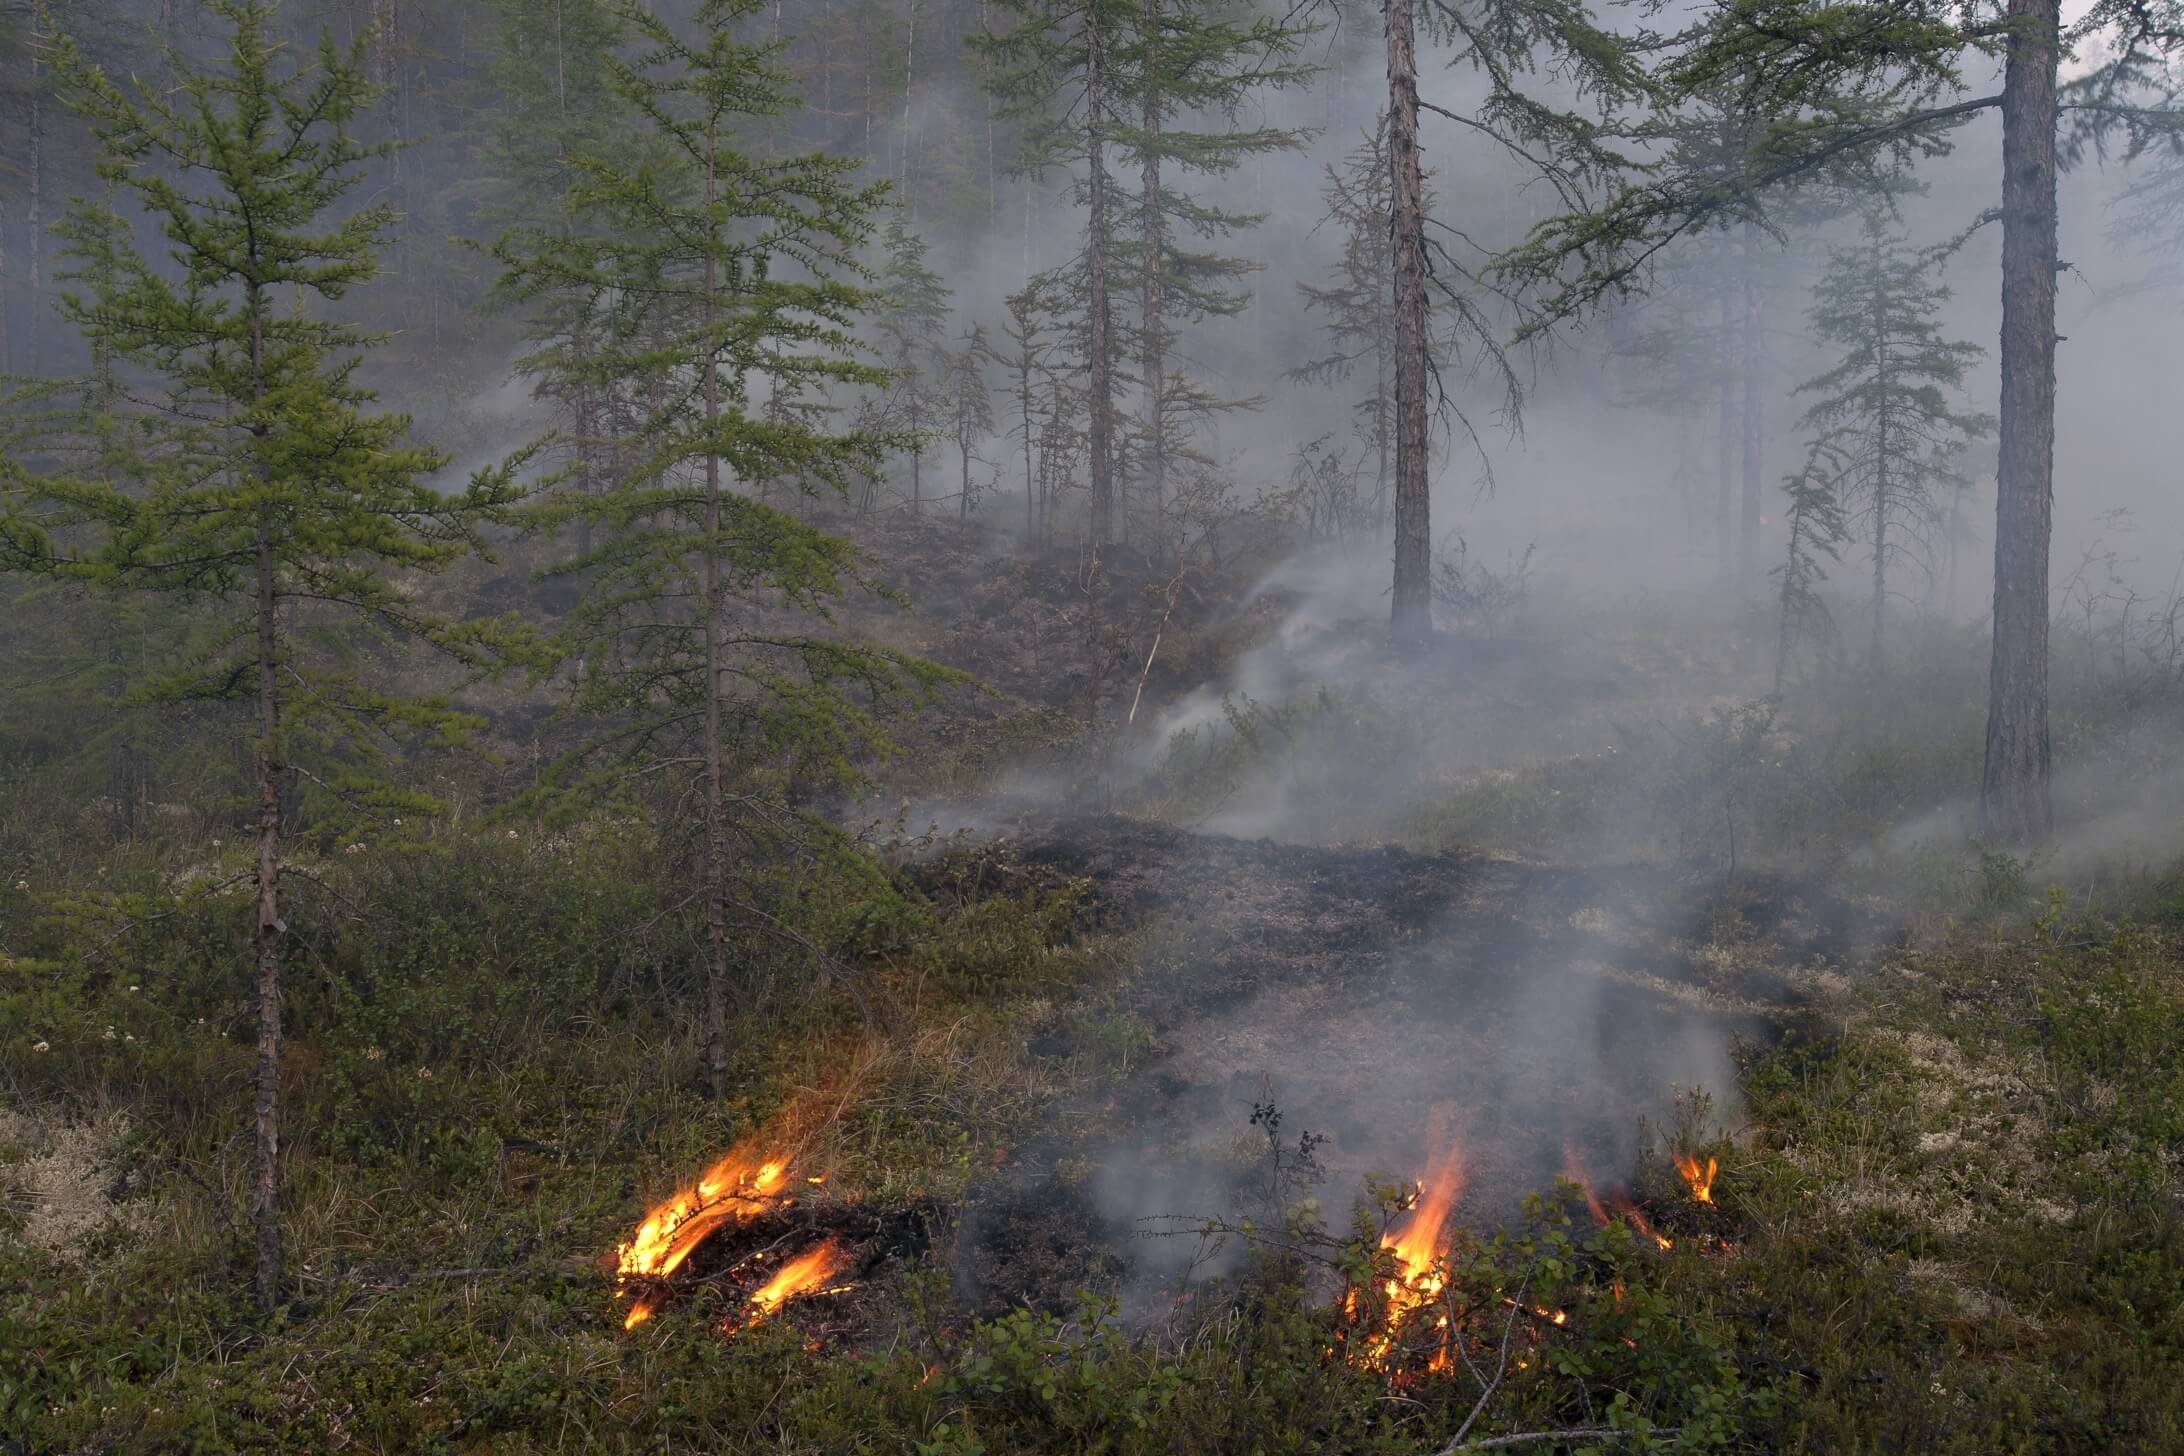 Small wildfires are detected quickly by the FIREBird system